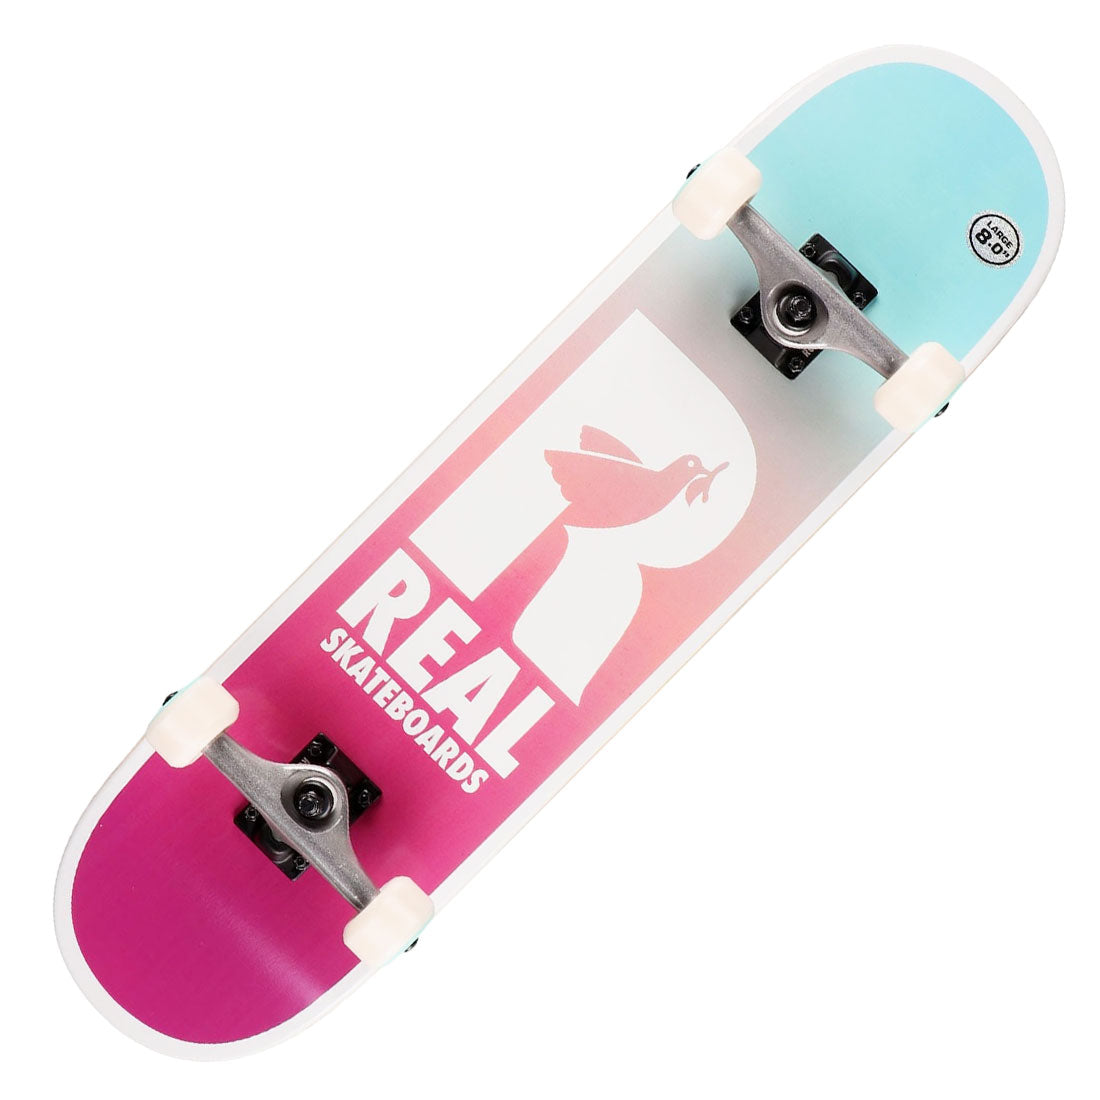 Real Be Free Fade 8.0 Complete Skateboard Completes Modern Street